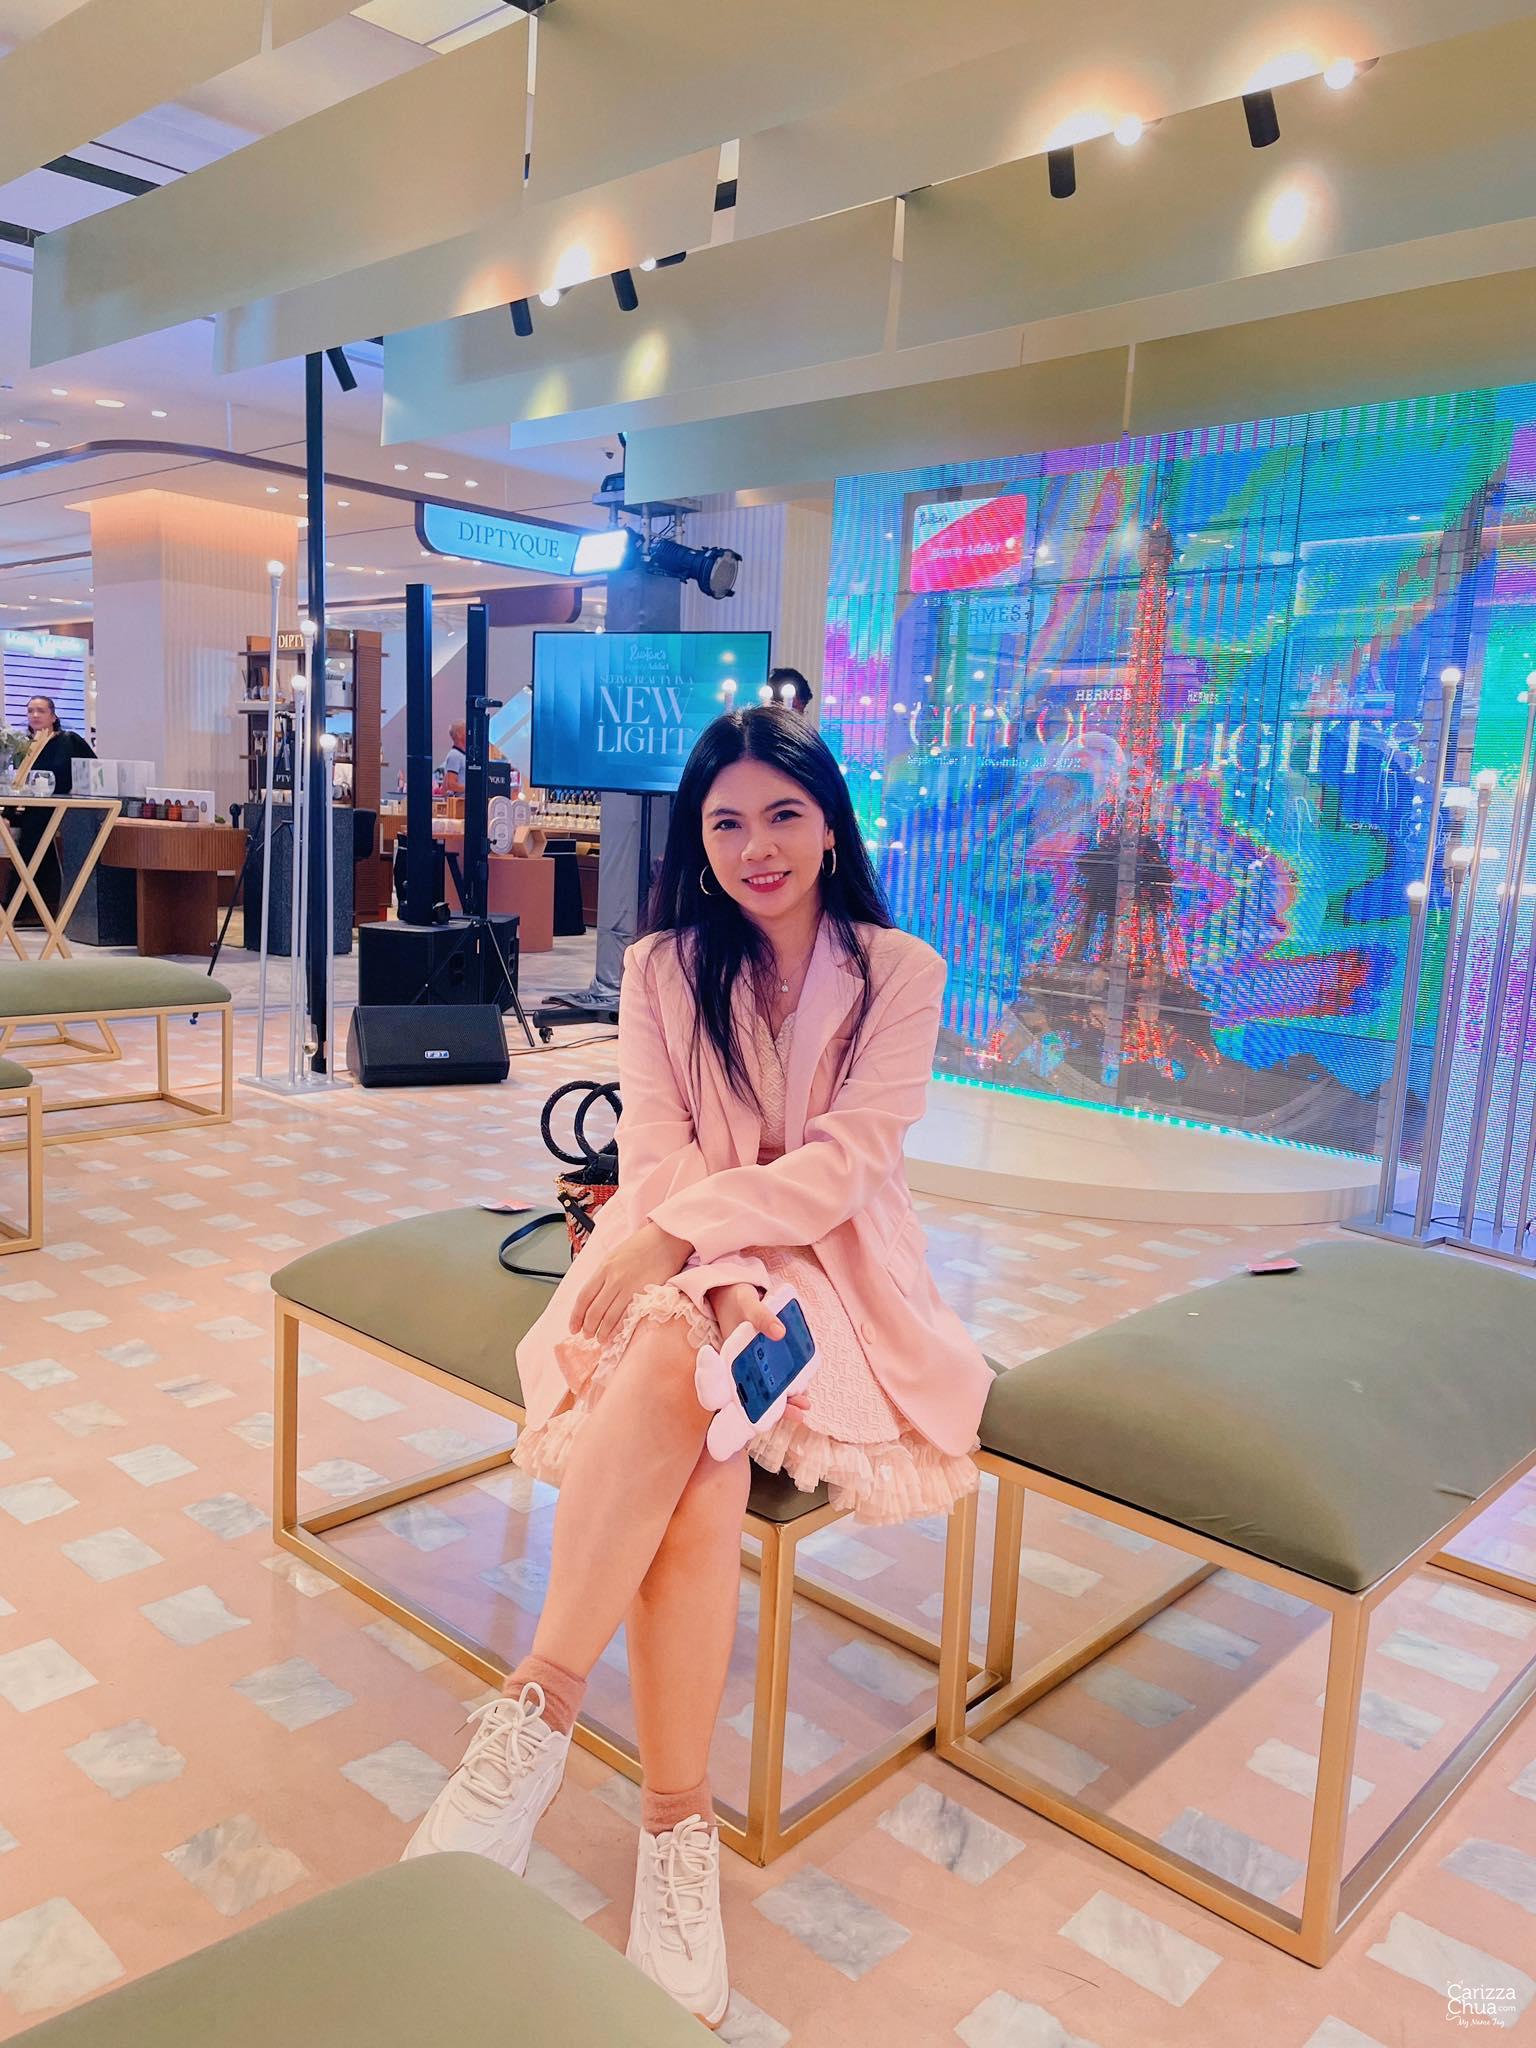 Rustan’s Beauty Addict Event: Seeing Beauty in a New Light